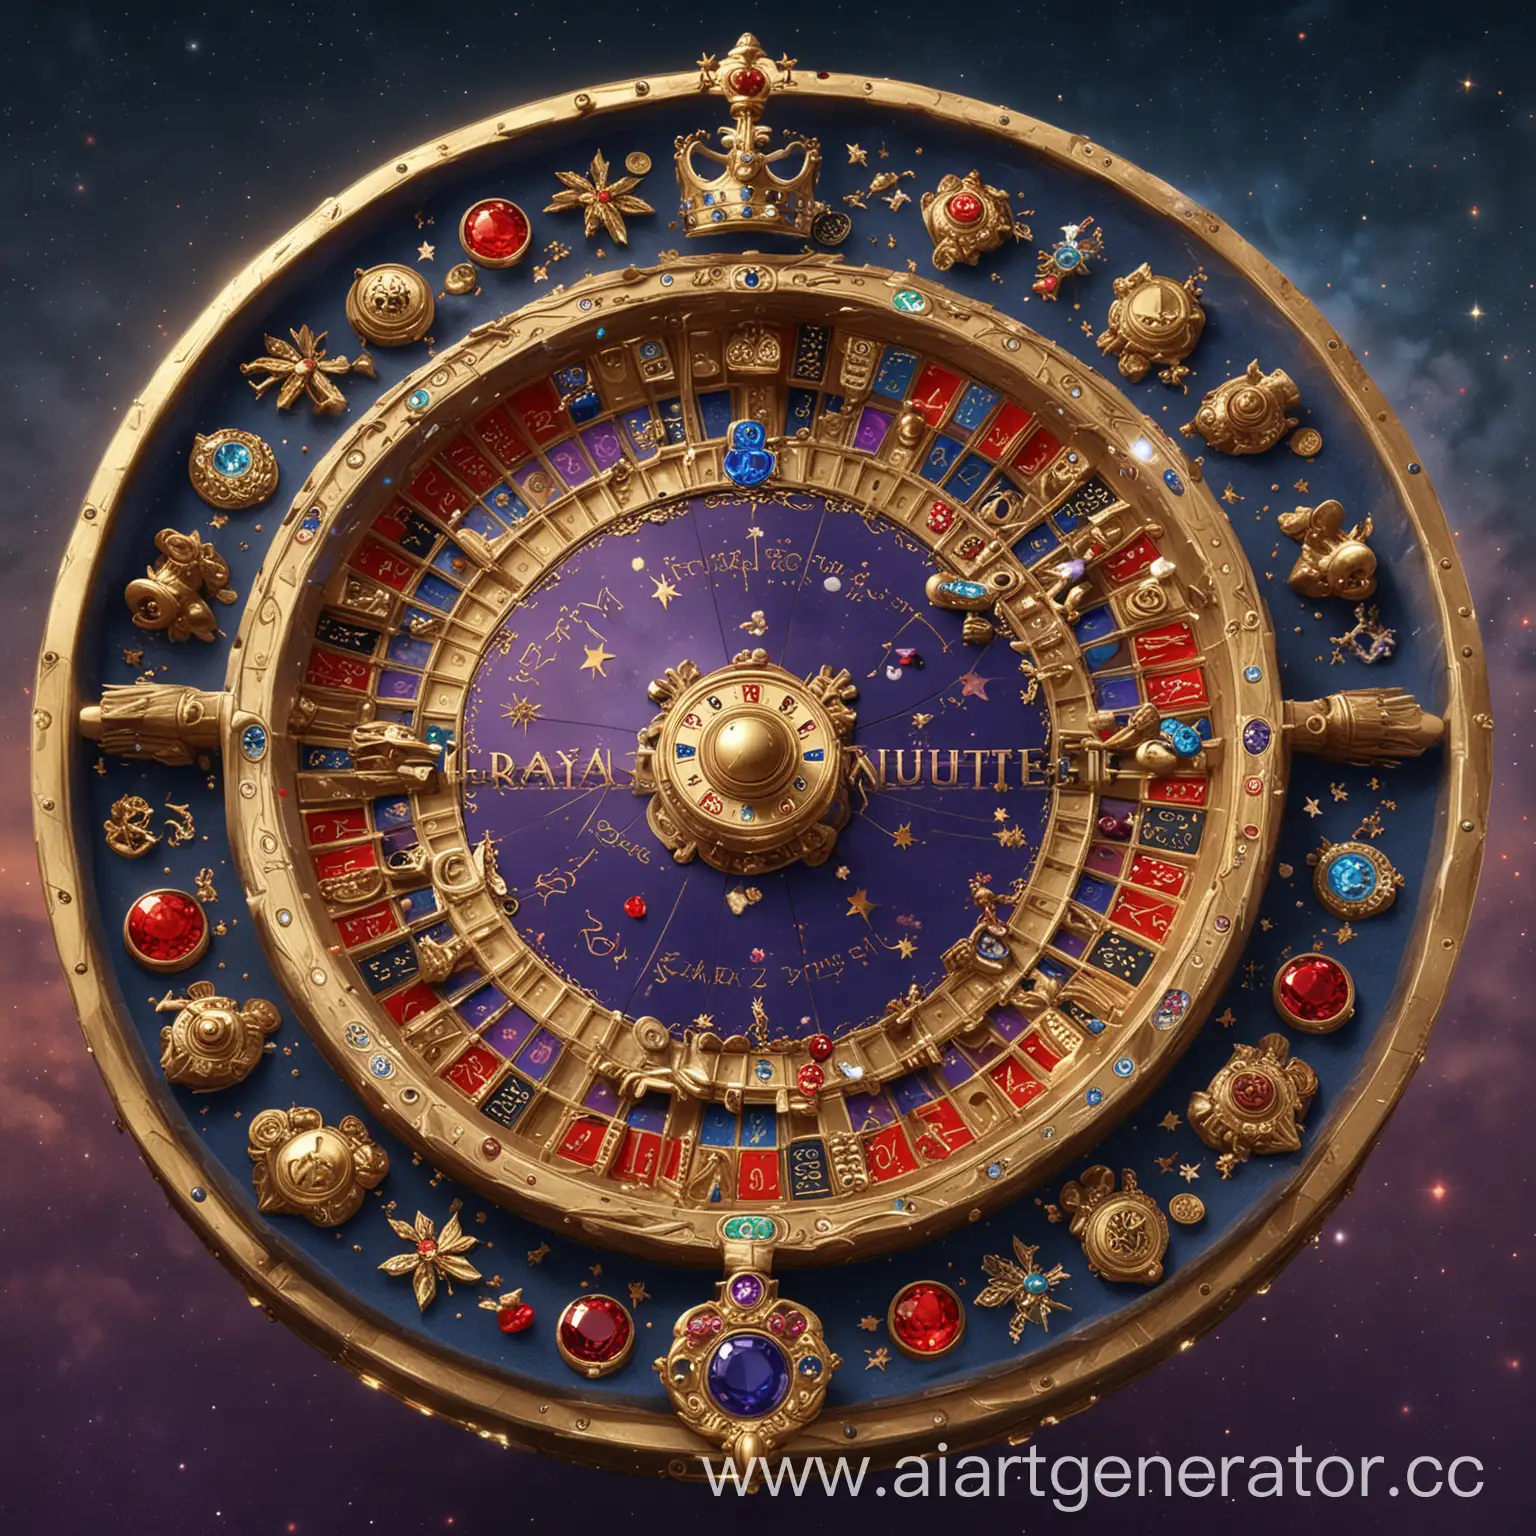 Background: Grandiose castle with high towers against the night sky with bright stars, surrounded by jewels and gold coins. Center Object: In the center is a roulette wheel with a golden rim surrounded by crowns and jewels. Details: Golden number "7" on the roulette, royal paraphernalia (scepters and coats of arms), scattered gold coins and jewels. Color Palette: Deep blue (sky), gold (roulette parts and coins), purple and red (jewels and crowns). Additional elements: A slight glow or sparkle around the roulette, the logo or name "RoyalBetRealm" at the bottom or top in gold letters with royal elements such as a crown or coat of arms.